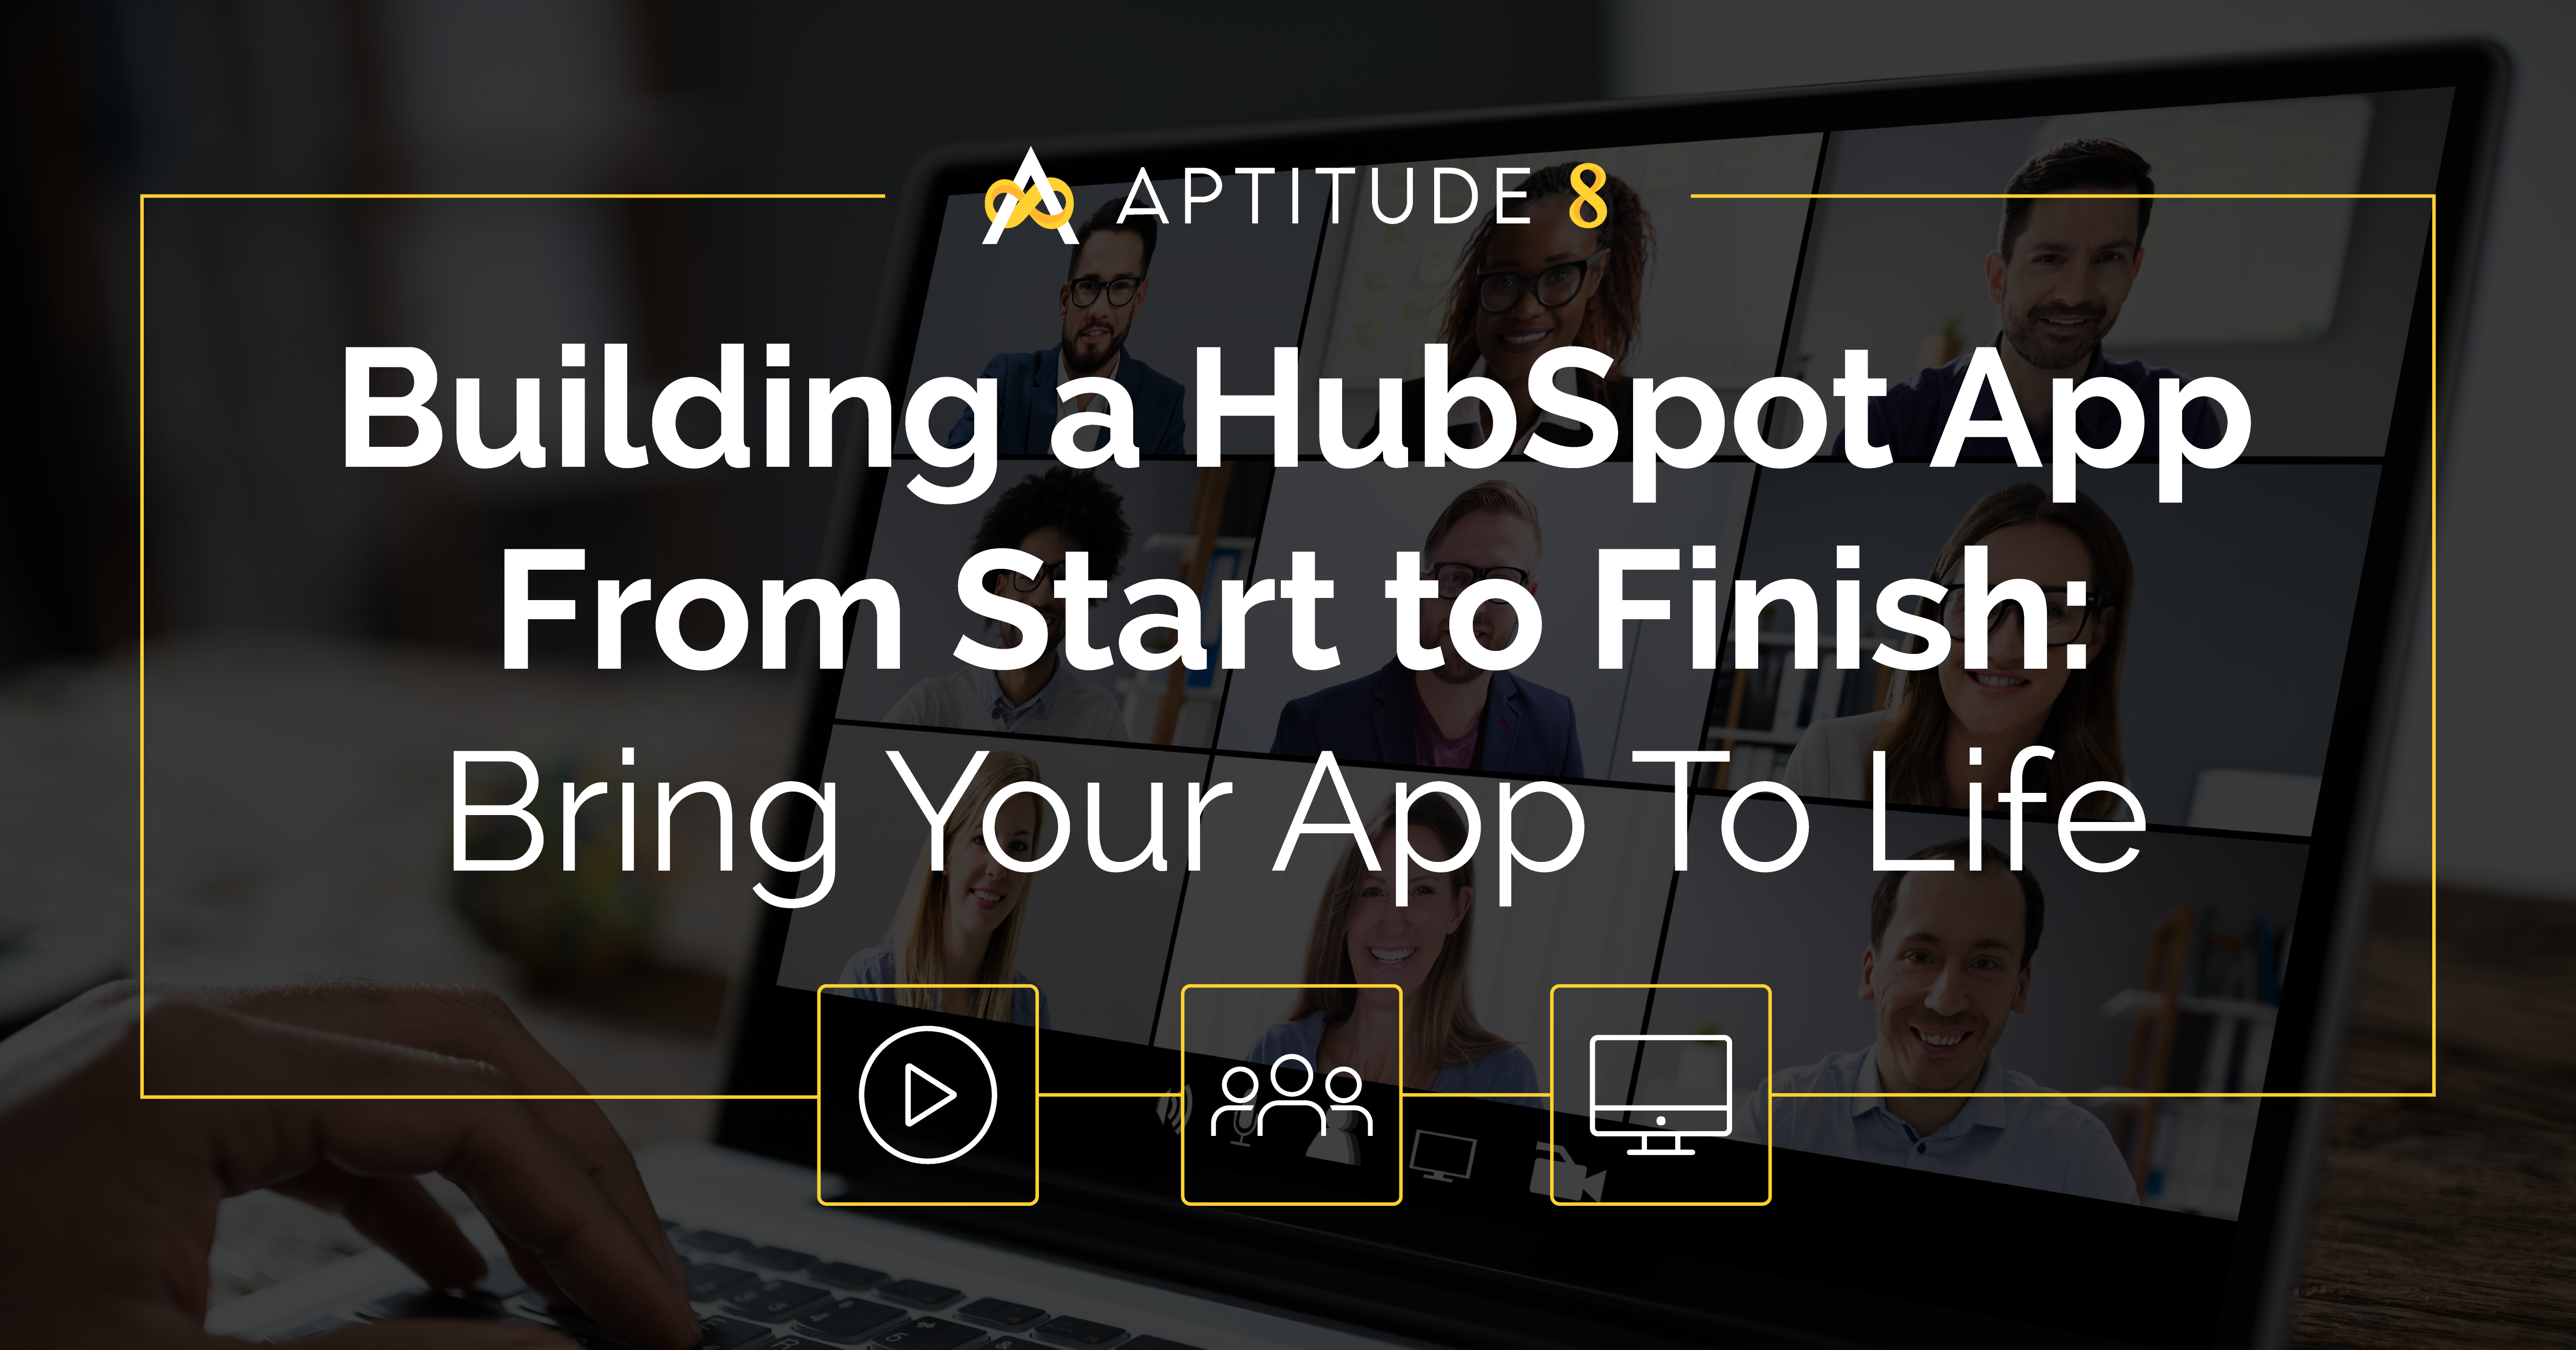 Building A HubSpot App From Start to Finish - Session 2